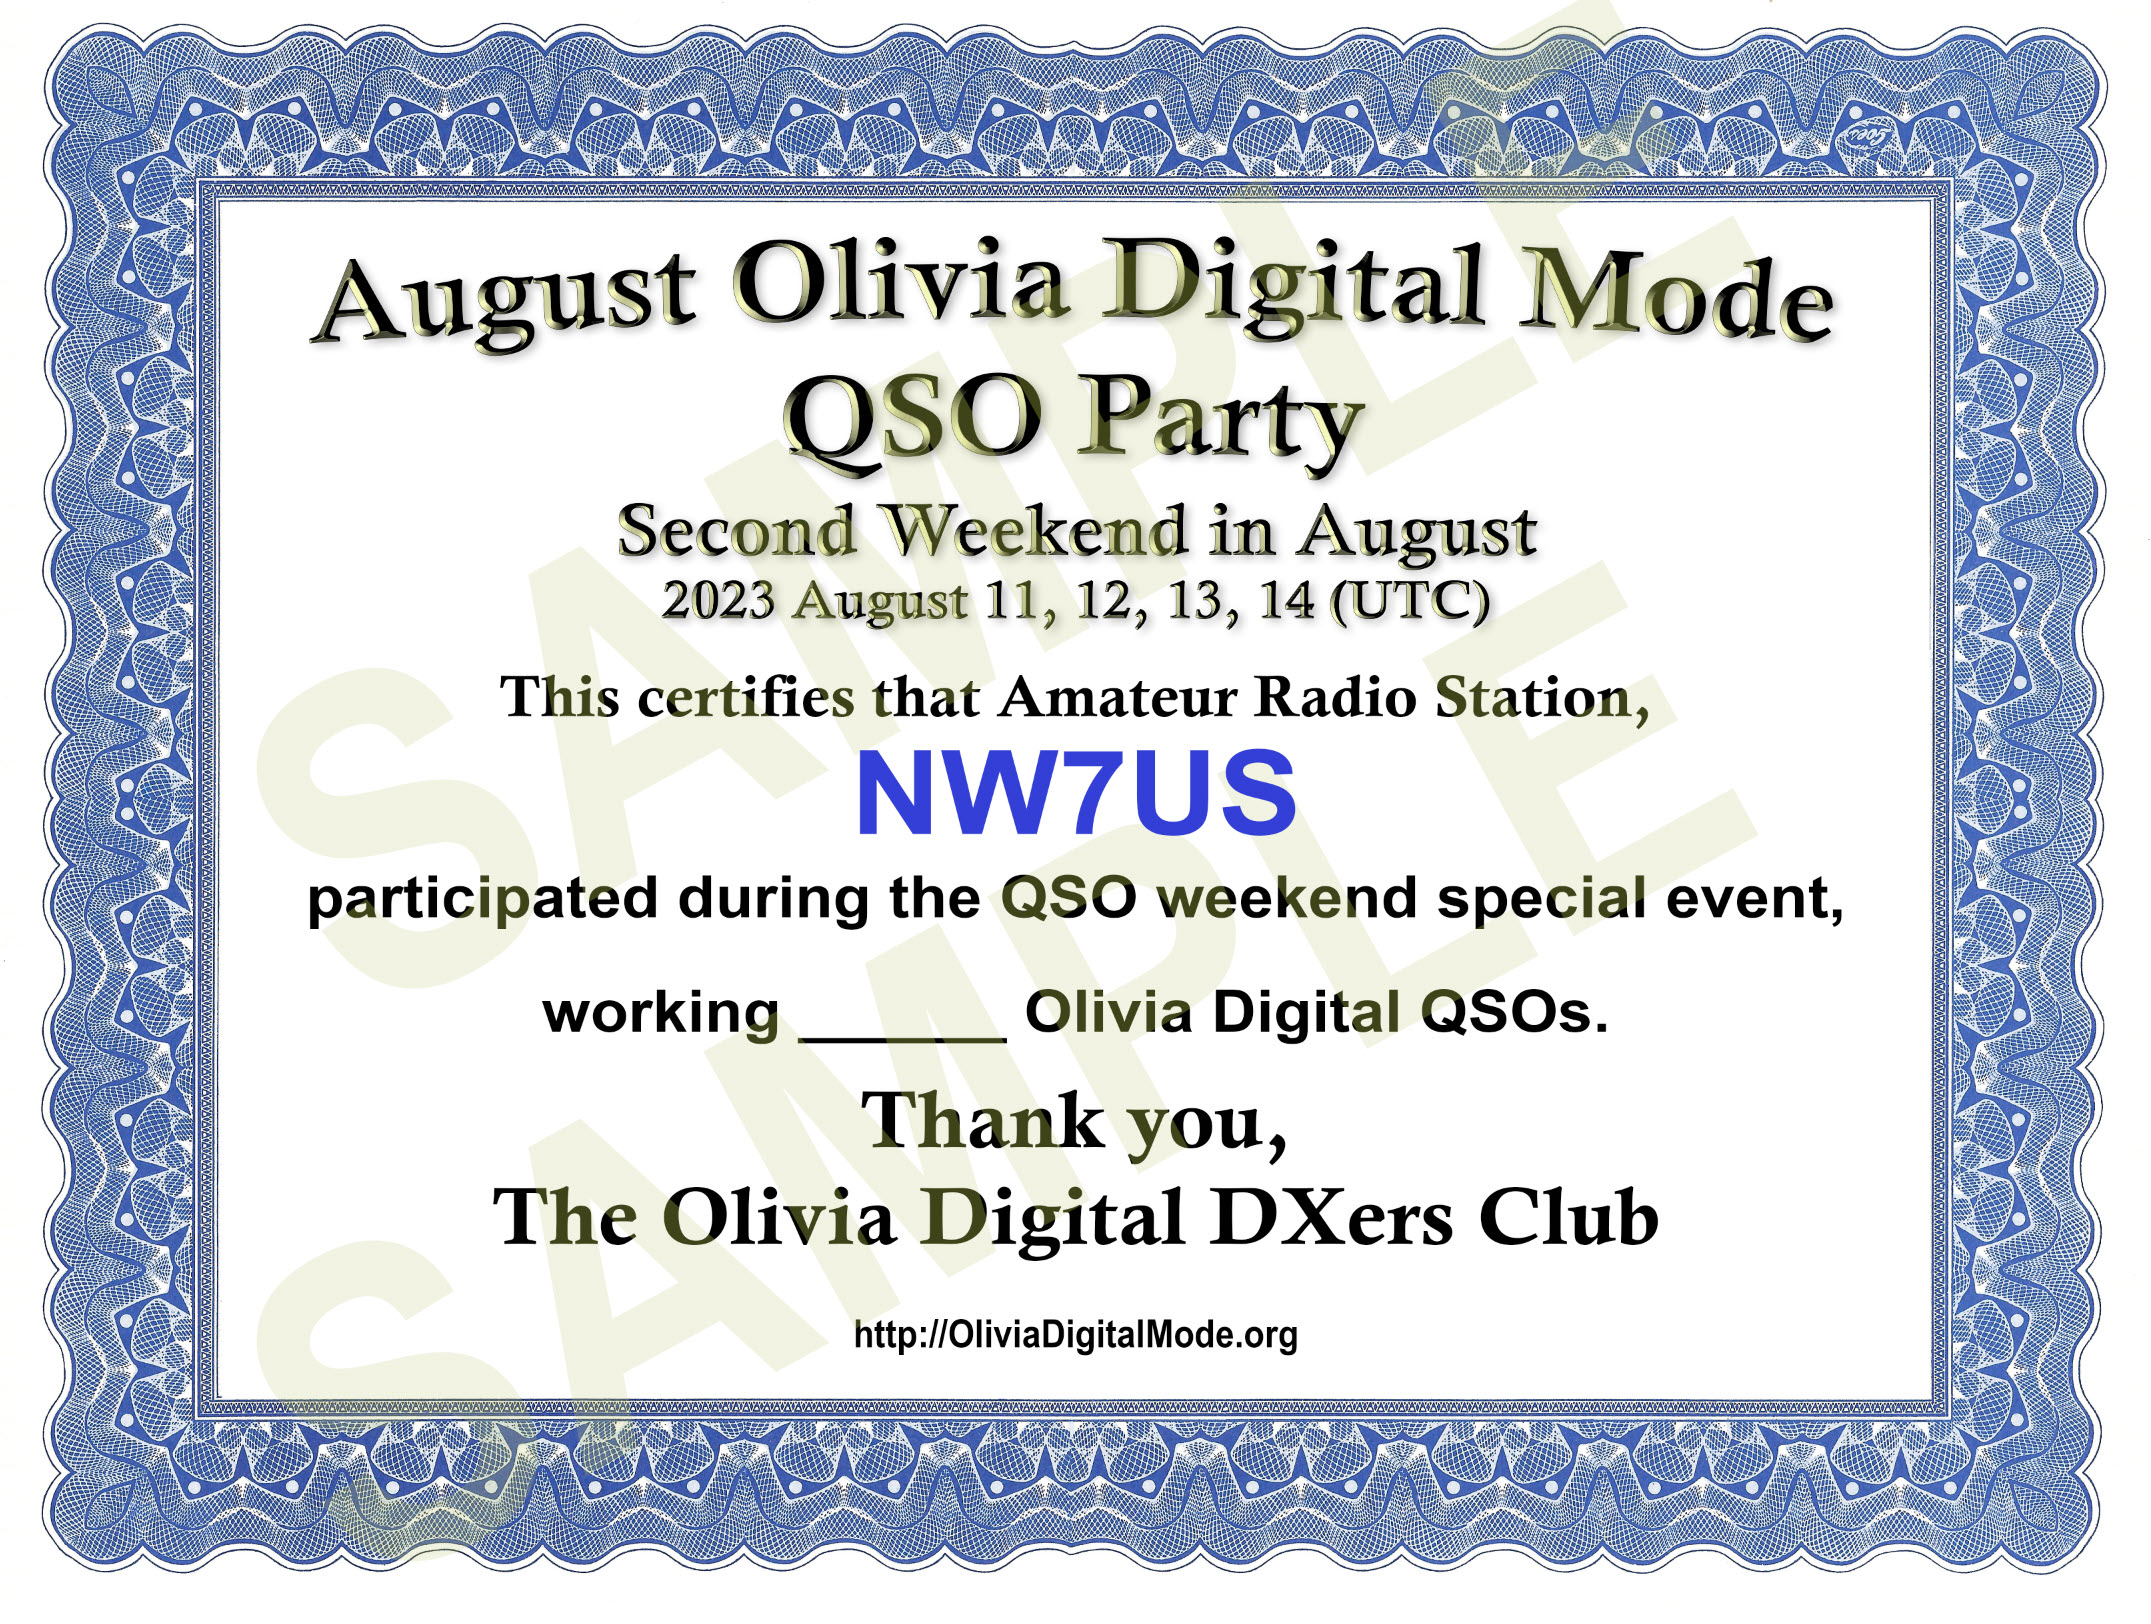 THE 2nd OLIVIA DIGITAL MODE WEEKEND QSO PARTY!